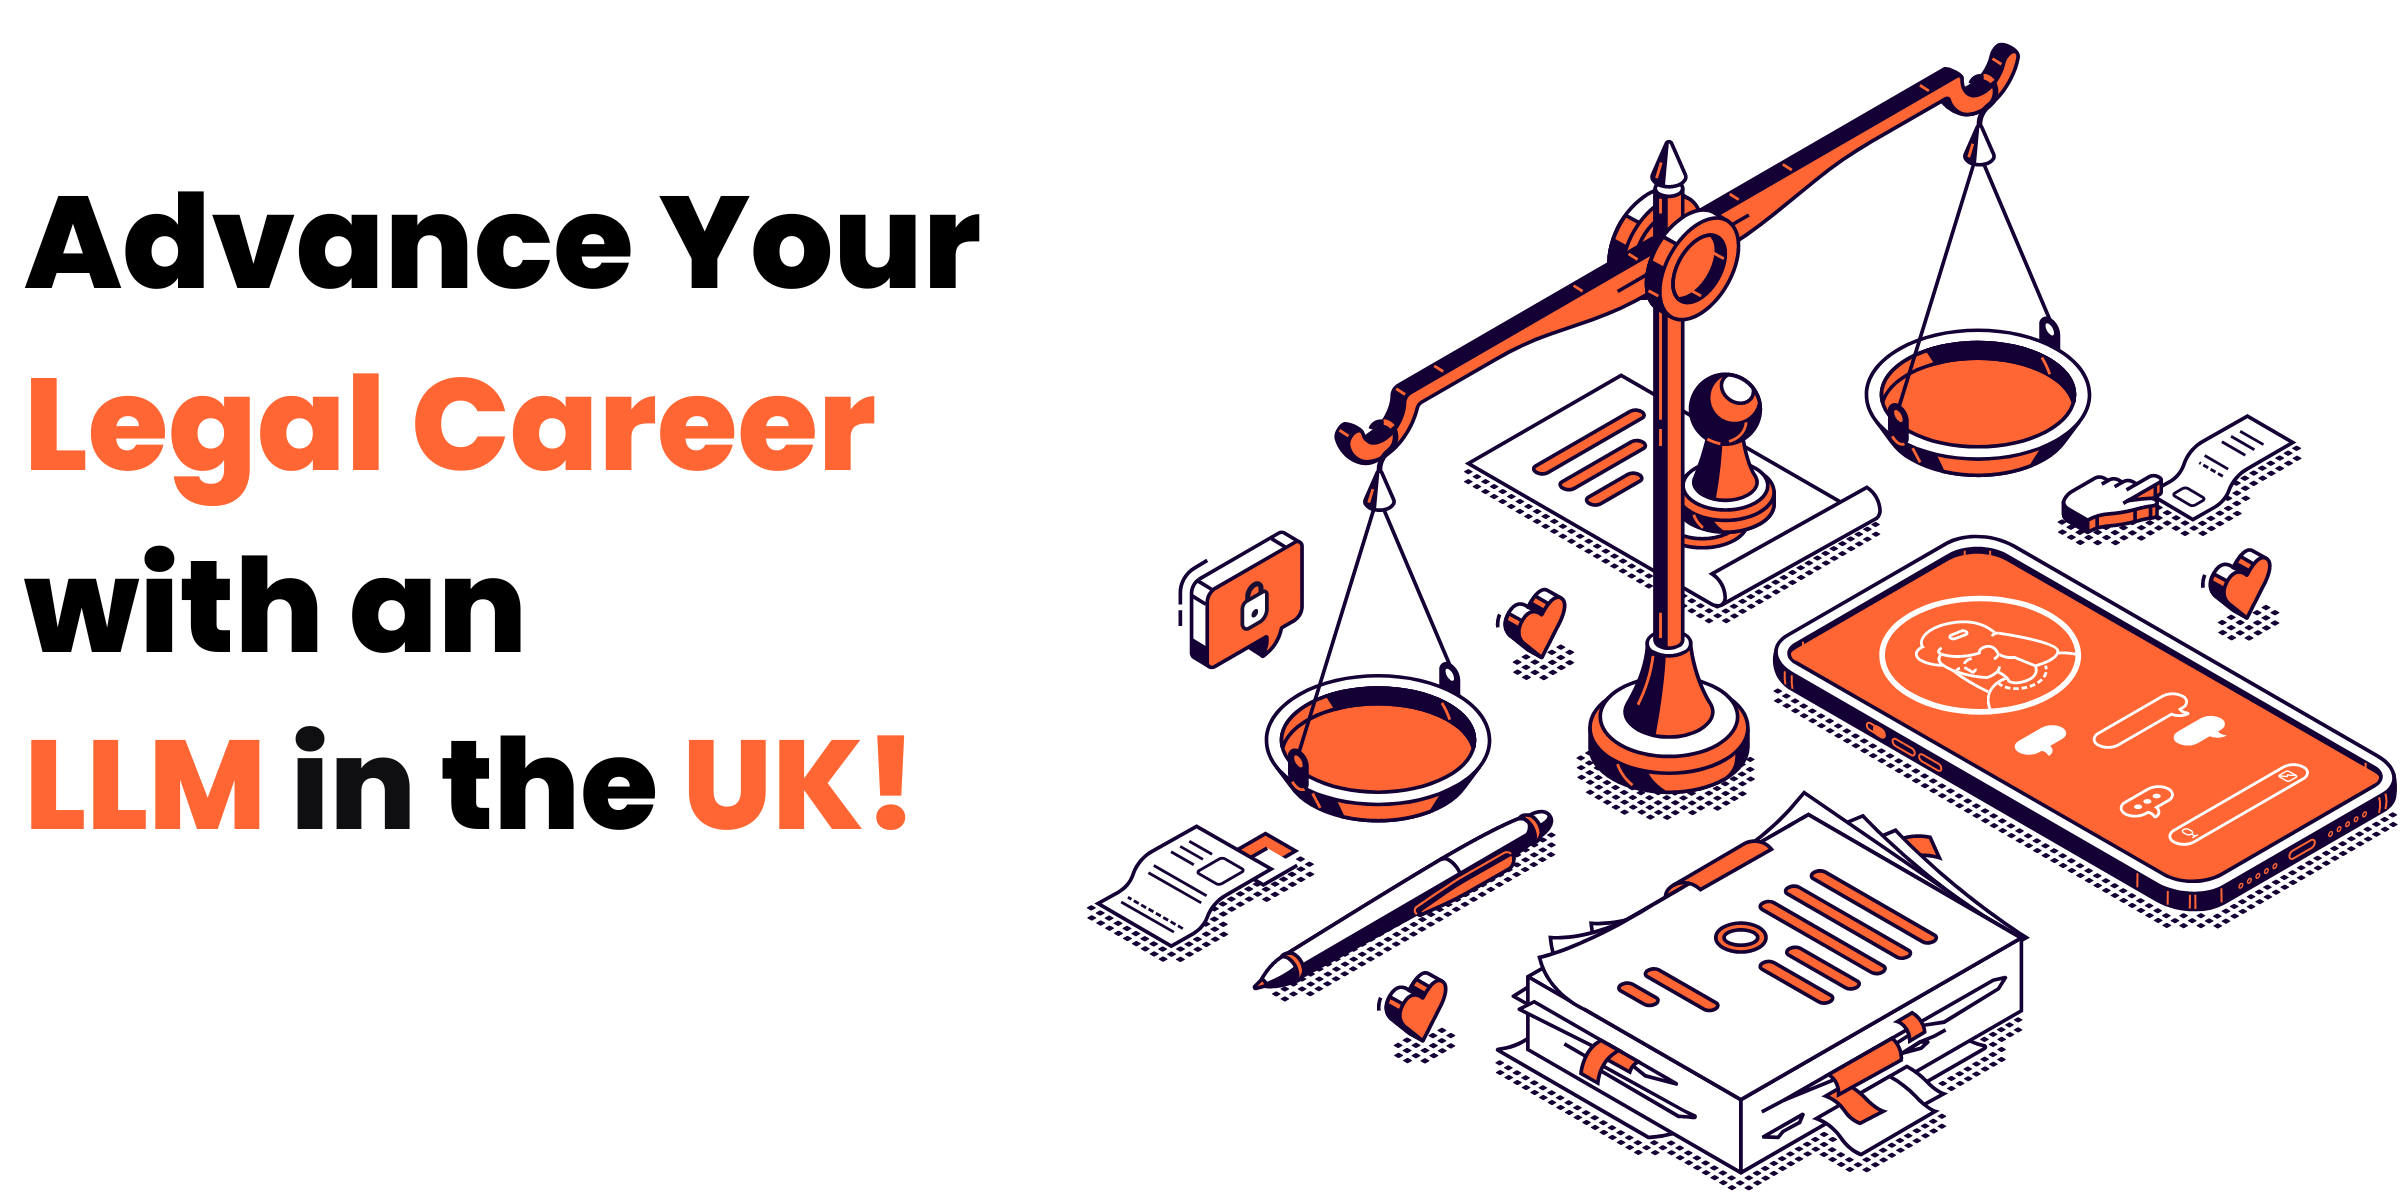 Advance your career with LLM in UK